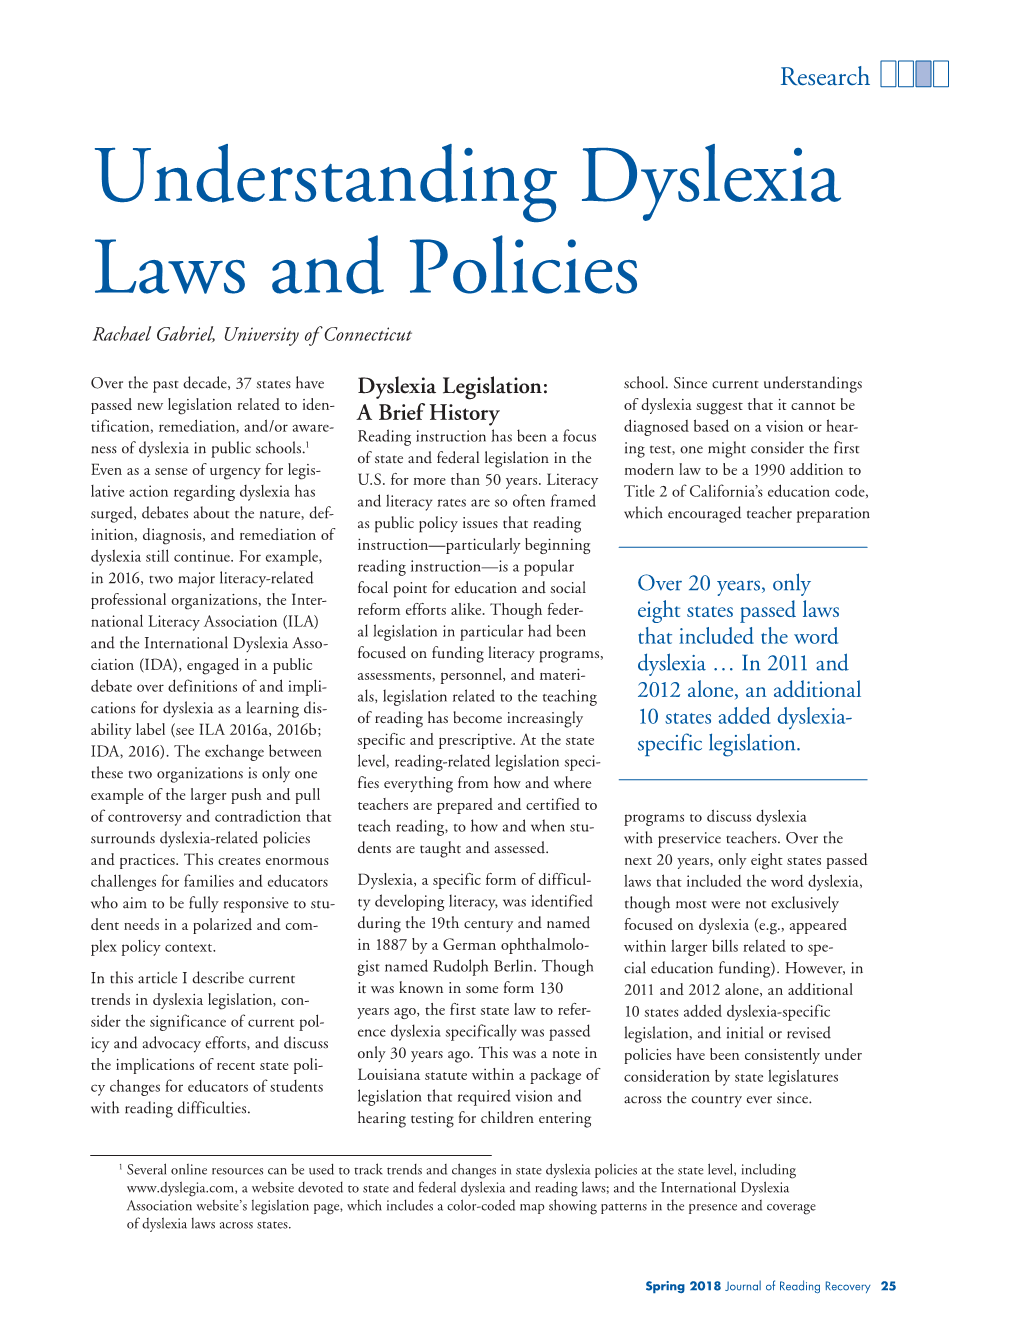 Understanding Dyslexia Laws and Policies Rachael Gabriel, University of Connecticut